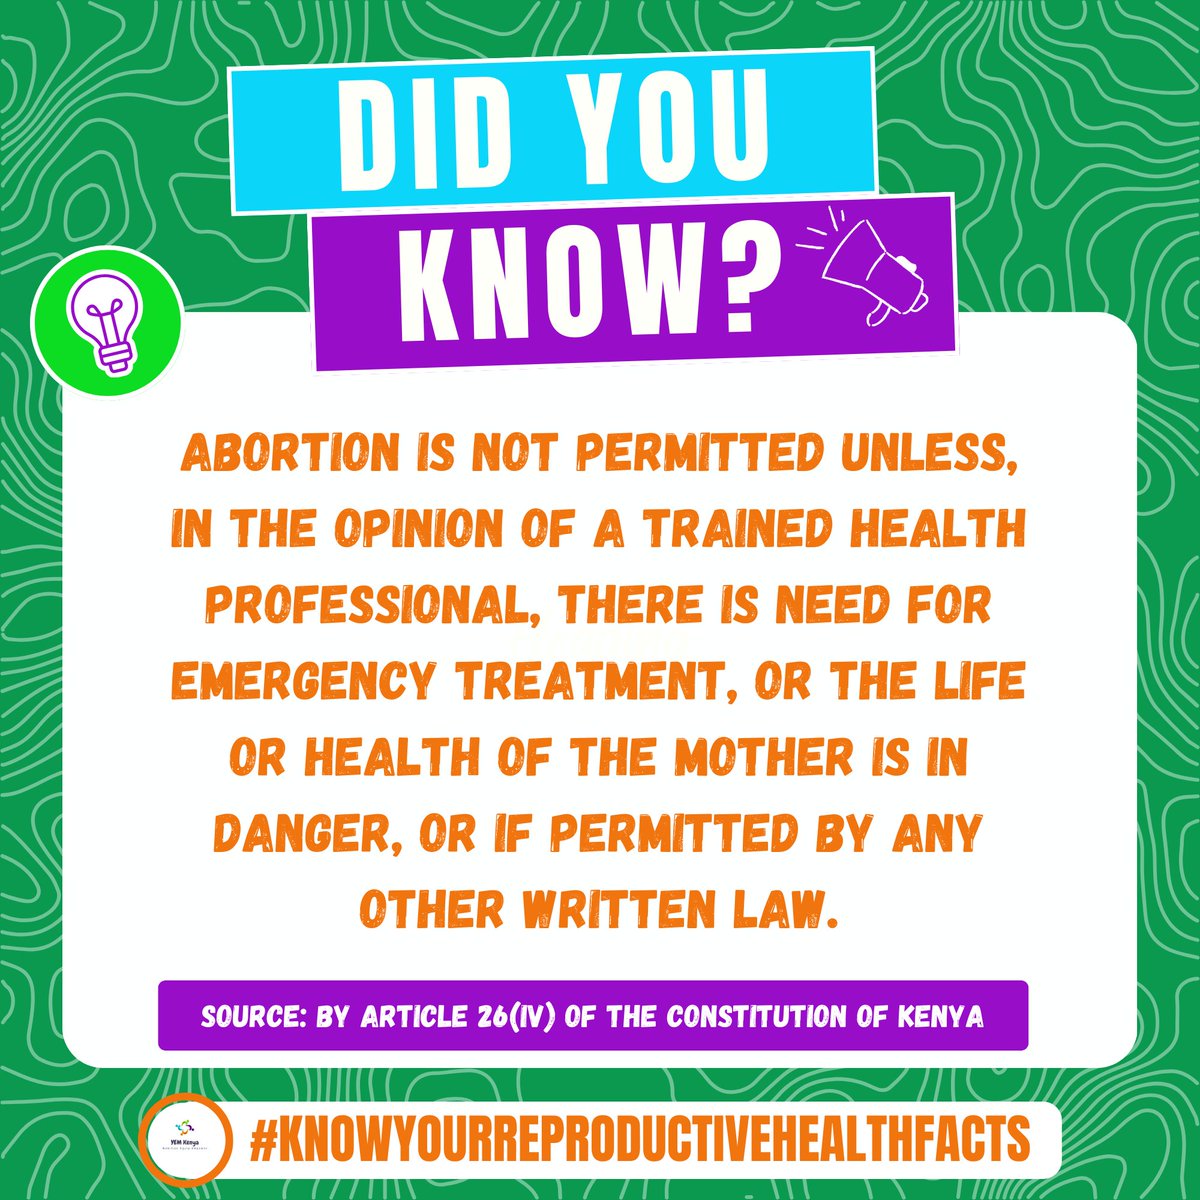 @_pink_shoes @rhnkorg @NAYAKenya @YourAuntyJane @NenaNaBinti @TheActionKenya @fidakenya @TICAH_KE @FemnetProg @lovemafrica Are you aware that Abortion is allowed when recommended by a qualified health professional, in cases of emergency treatment, when the life or health of the mother is at risk, or as authorized by other applicable written laws? #KnowYourReproductiveHealthFacts